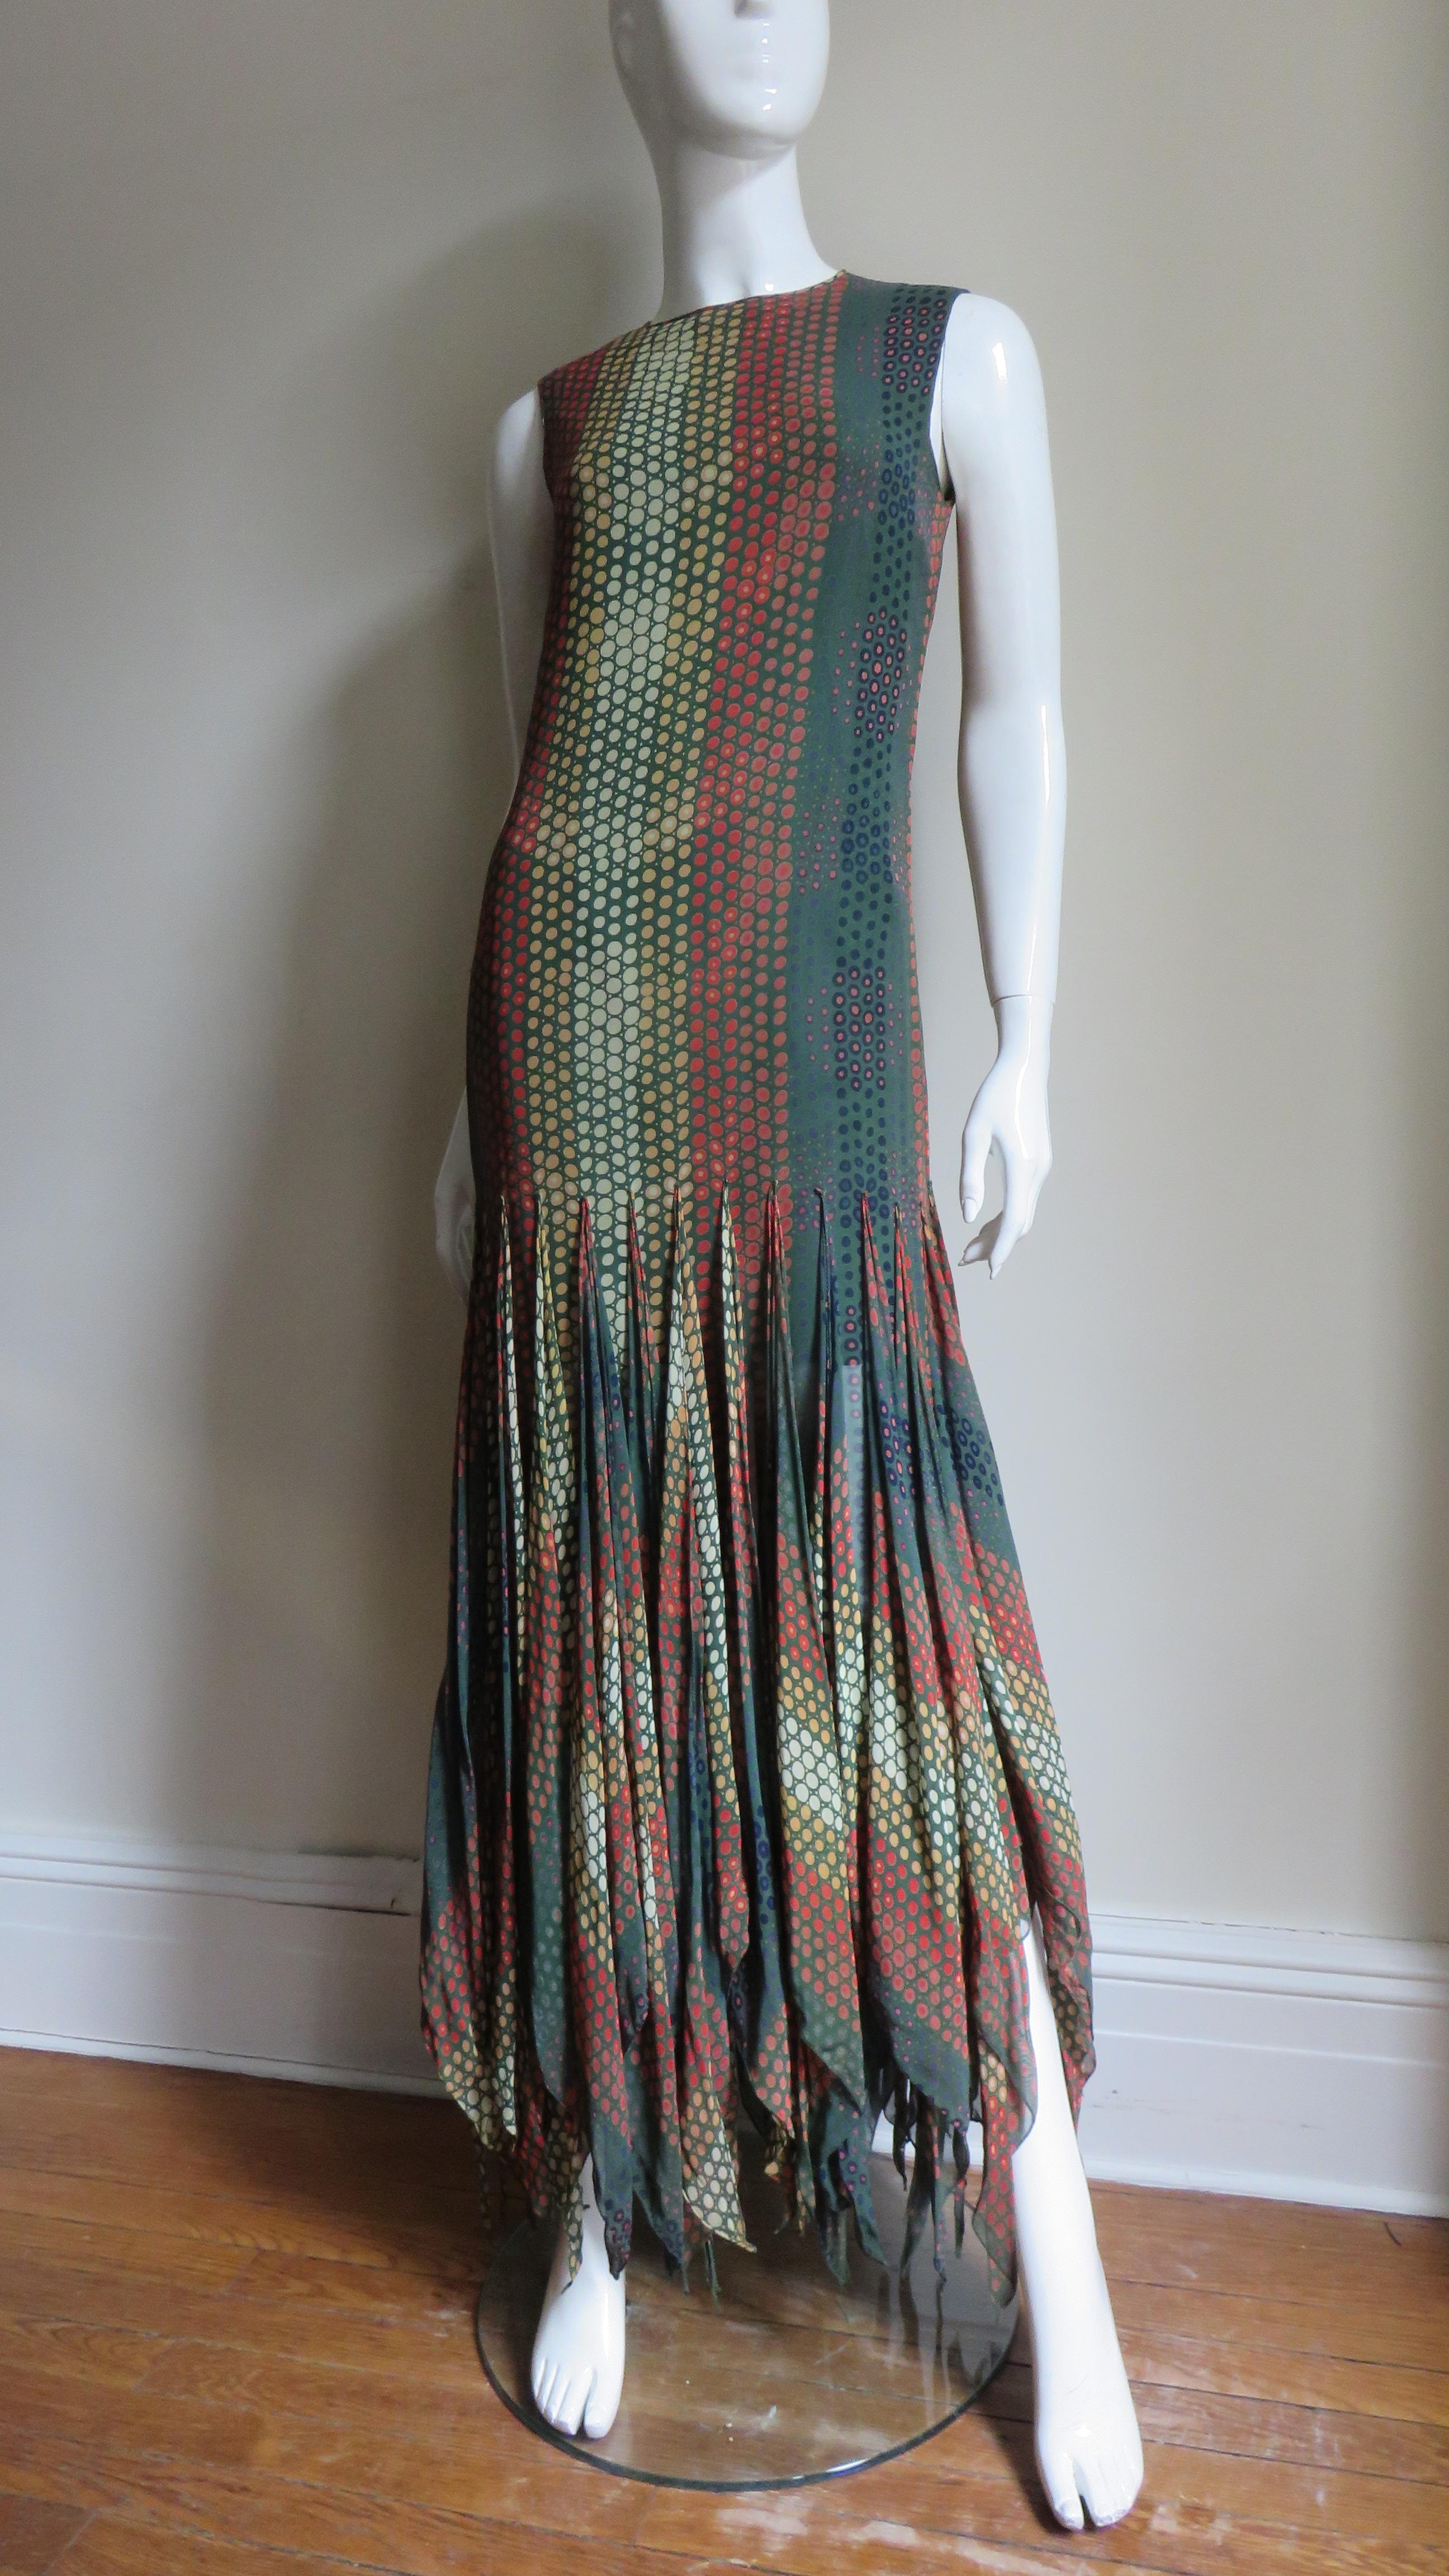 An incredible forest green silk maxi dress with red, orange, rust, blue and celery green dots by Pierre Cardin. The dress is sleeveless with a crew neck and attached by a point at mid thigh level a row of individually finished squares of the fabric